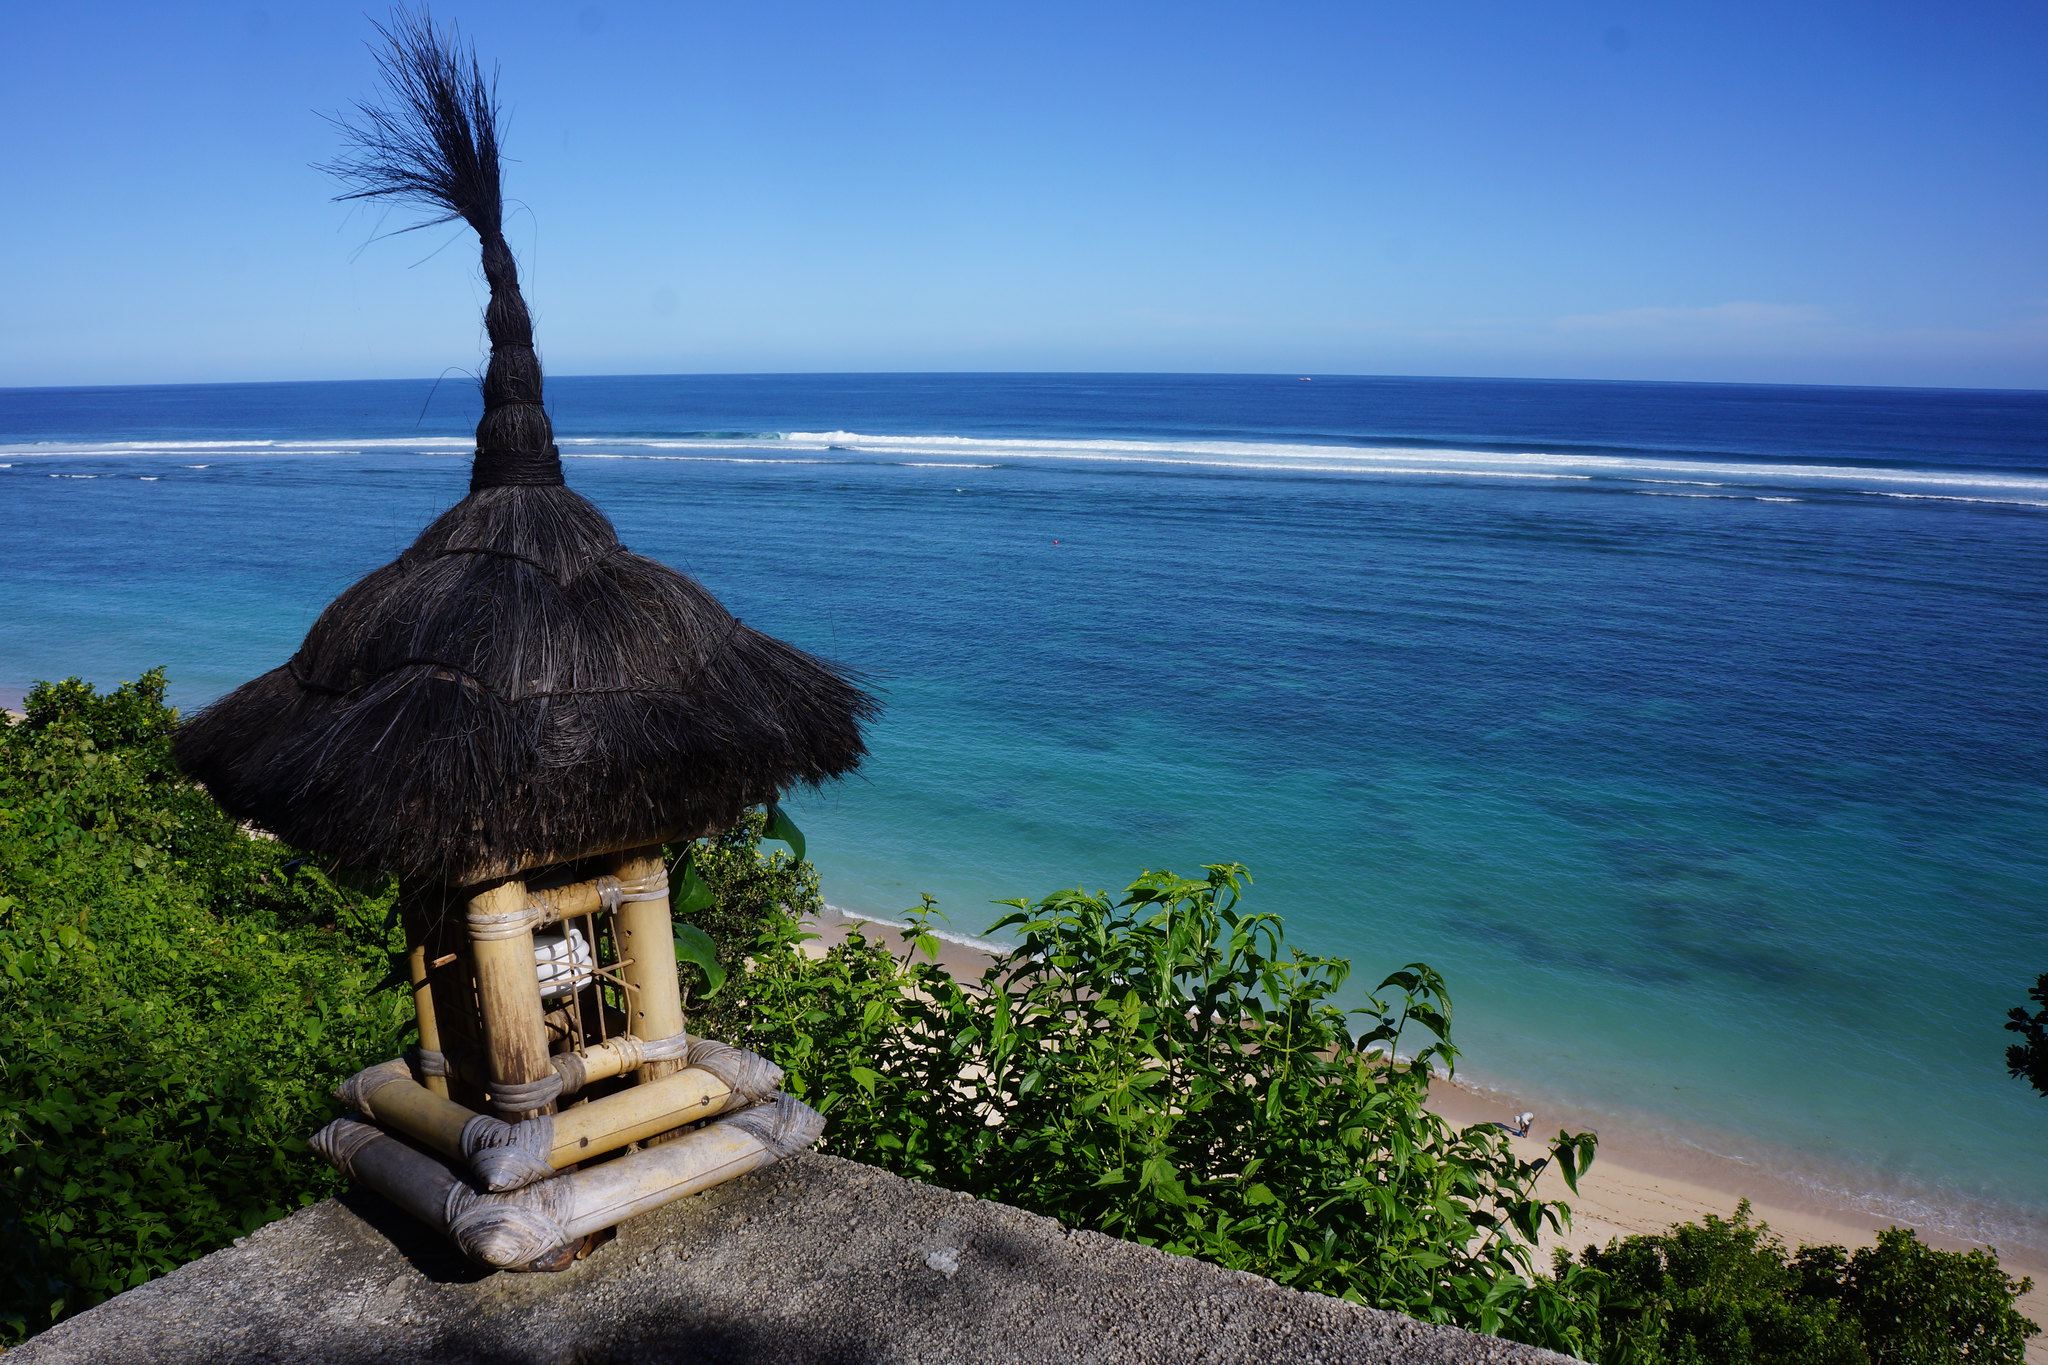 20 Instagrammable Places to Visit in Bali #Instaworthy